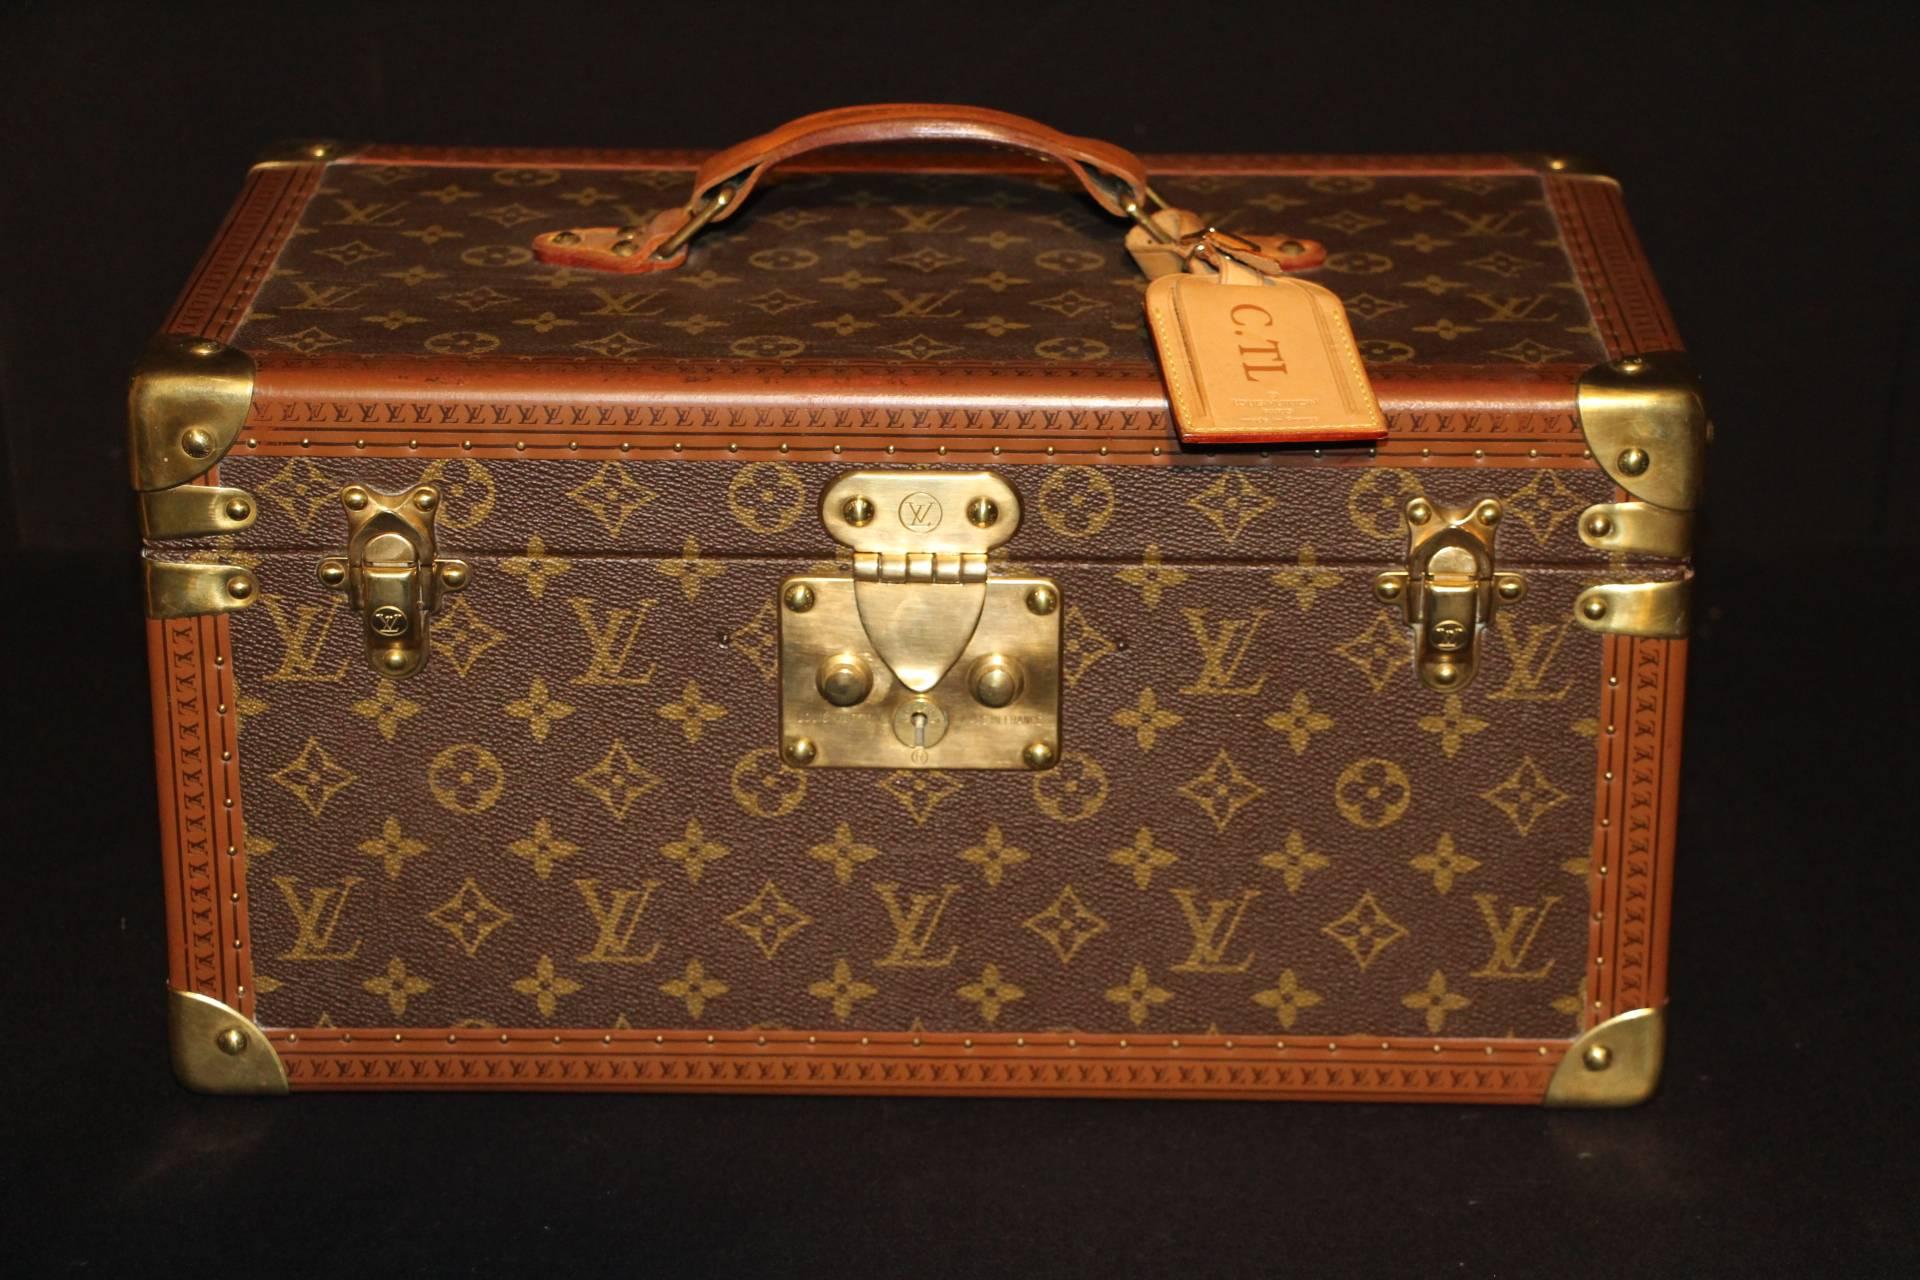 
This beauty case features monogram canvas and all brass fittings.
All studs are marked as well as its leather handle.
Interior:beige coated canvas,adjustable leather straps for holding materials,
detachable half tray on the top.
Under the lid